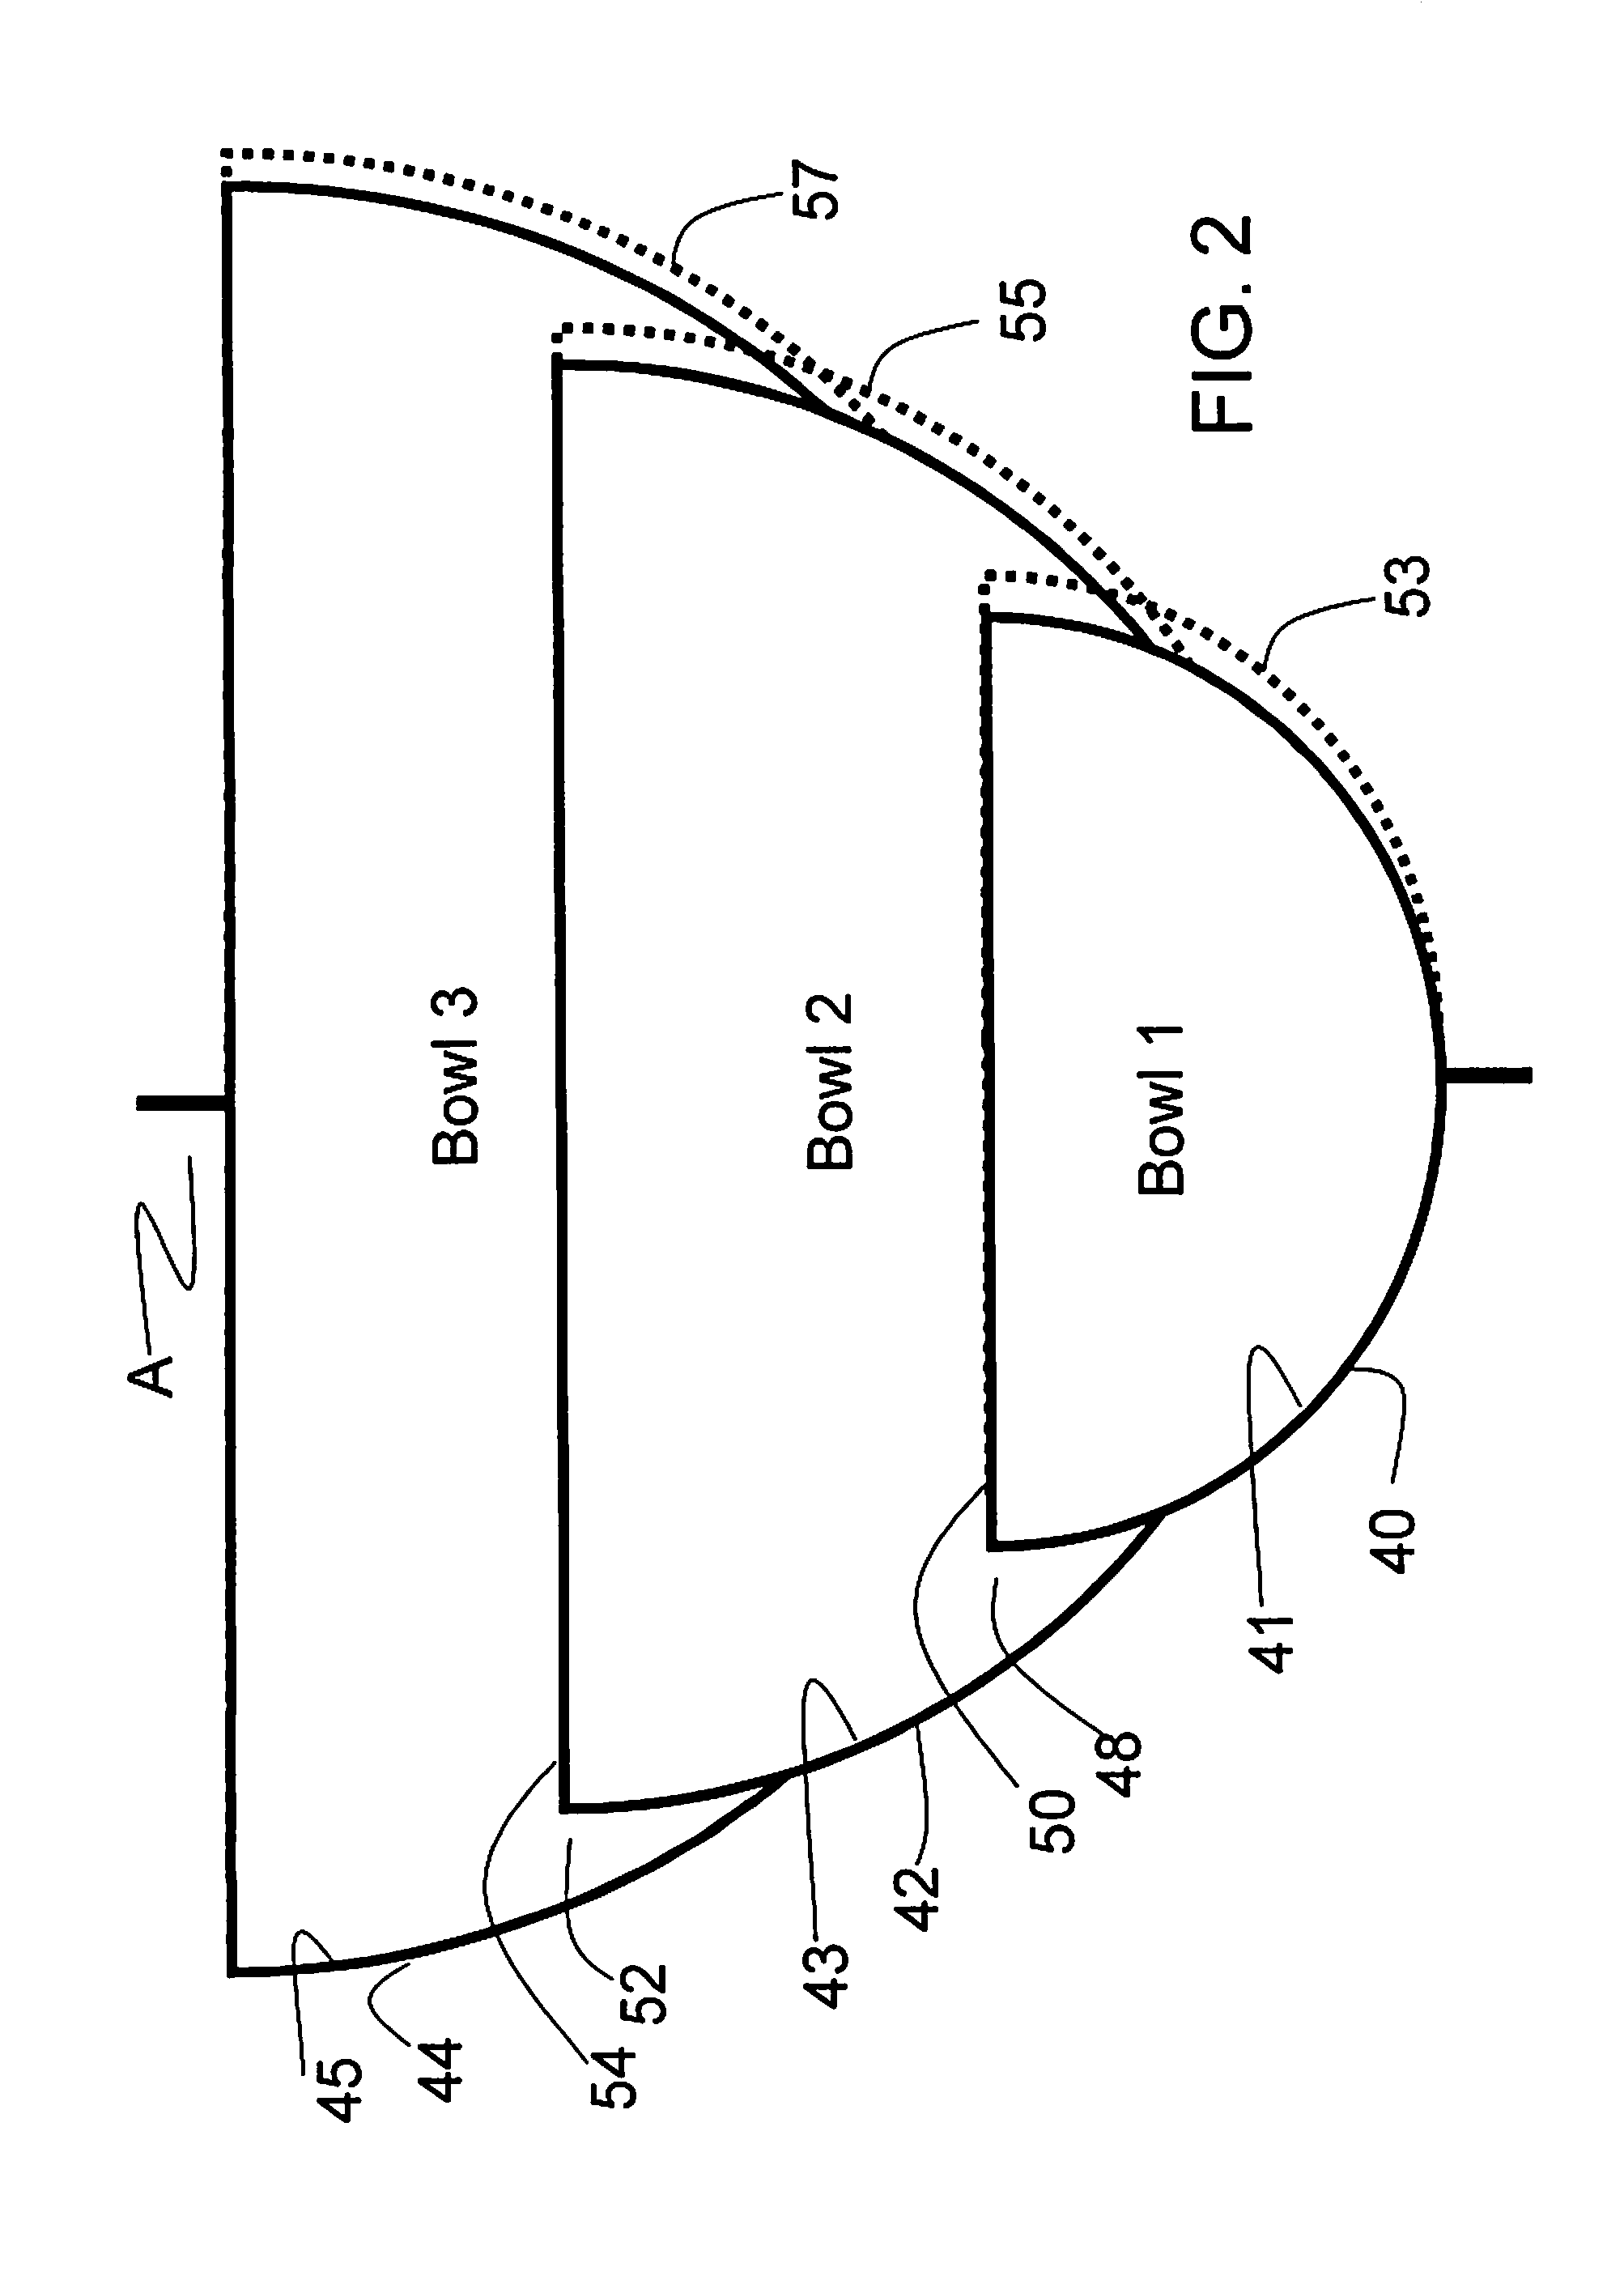 Acceleration Of A Mass By A Structure Under Central Or Gyration Induced Forces